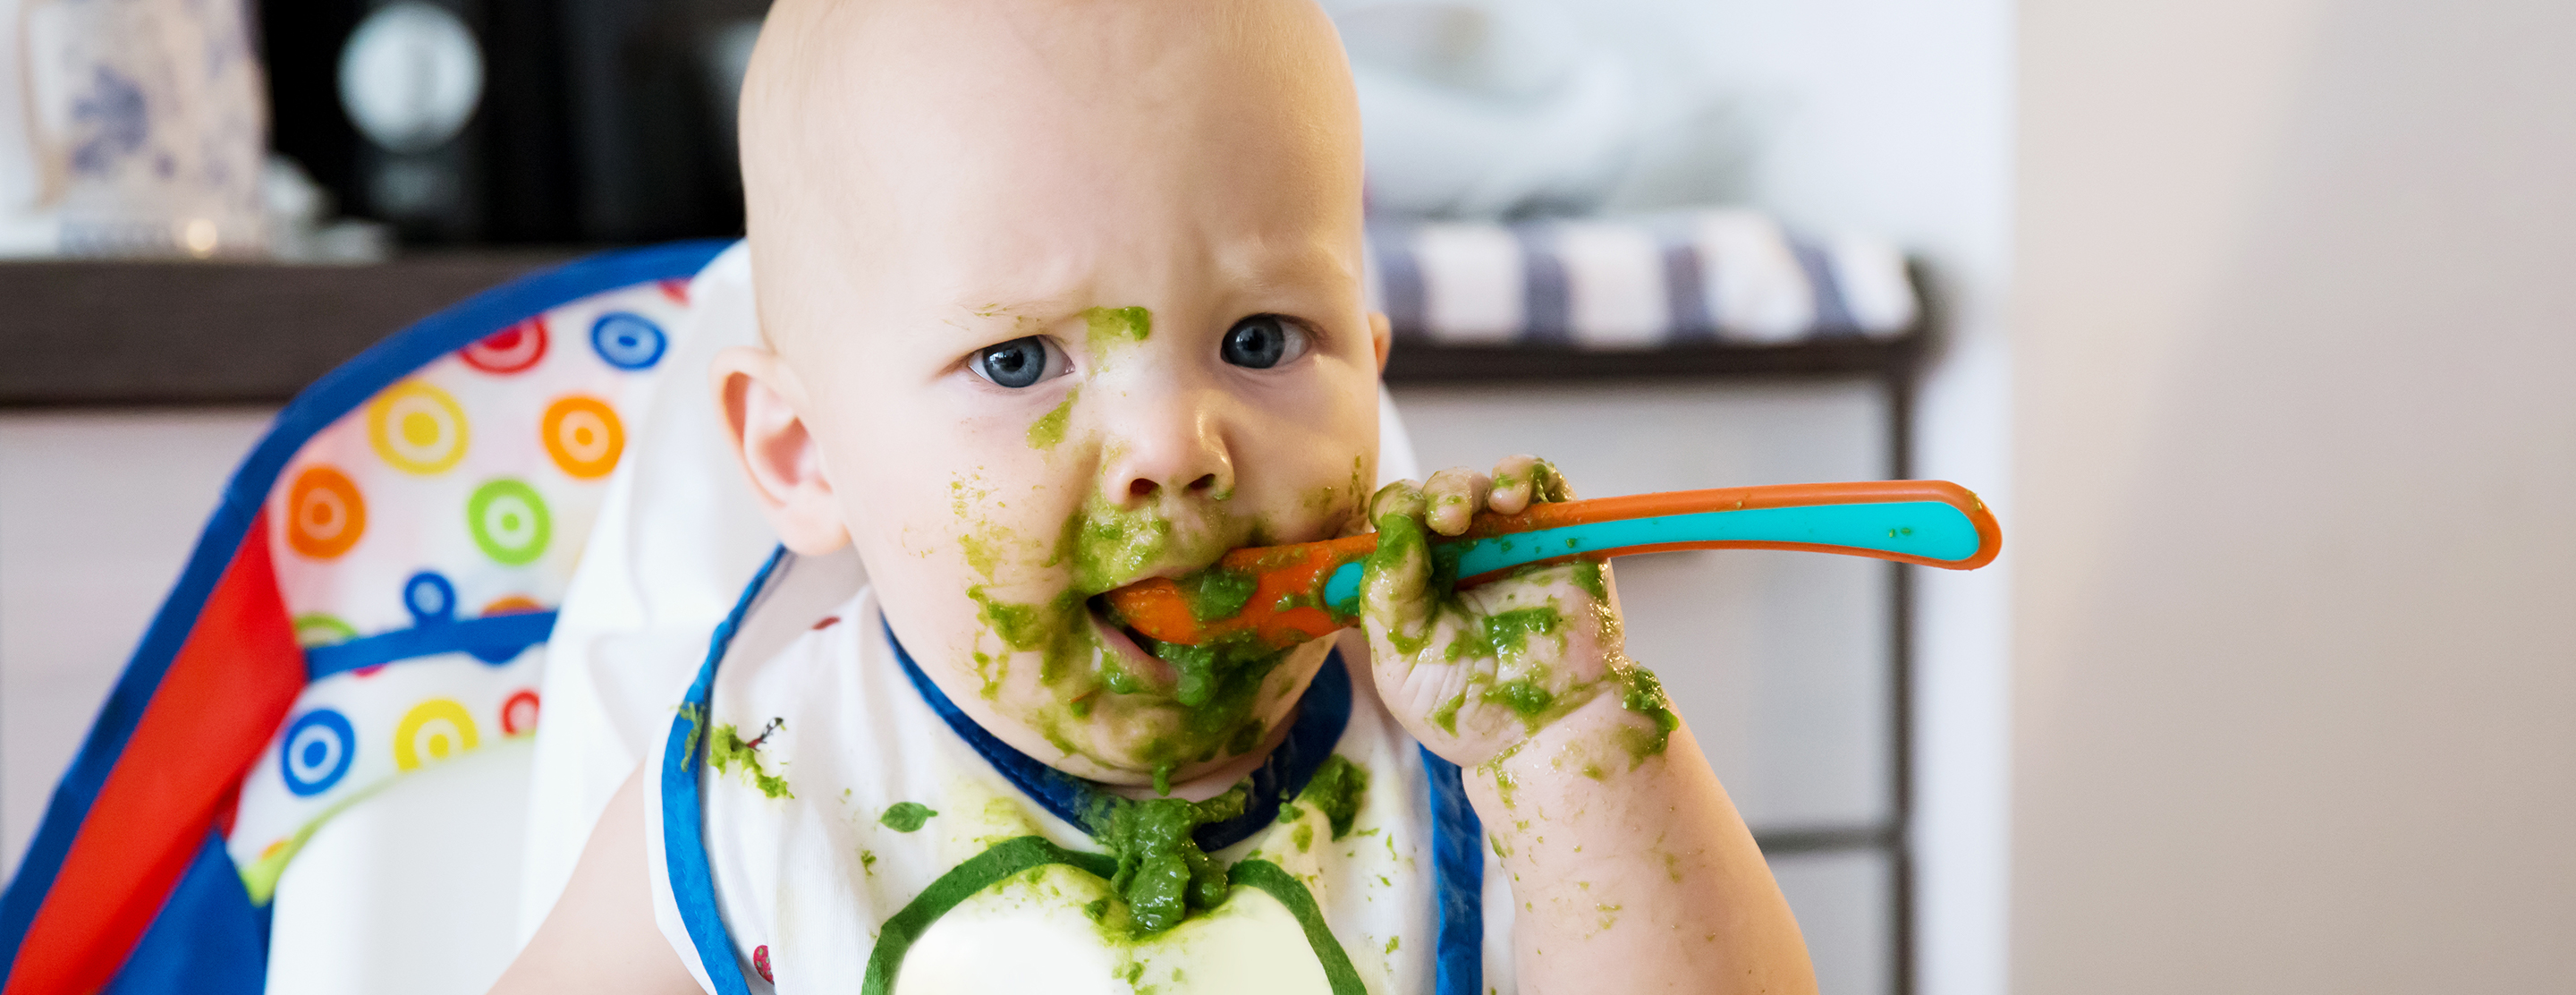 Starting Solid Foods | Patient Education | UCSF Benioff Children's Hospitals